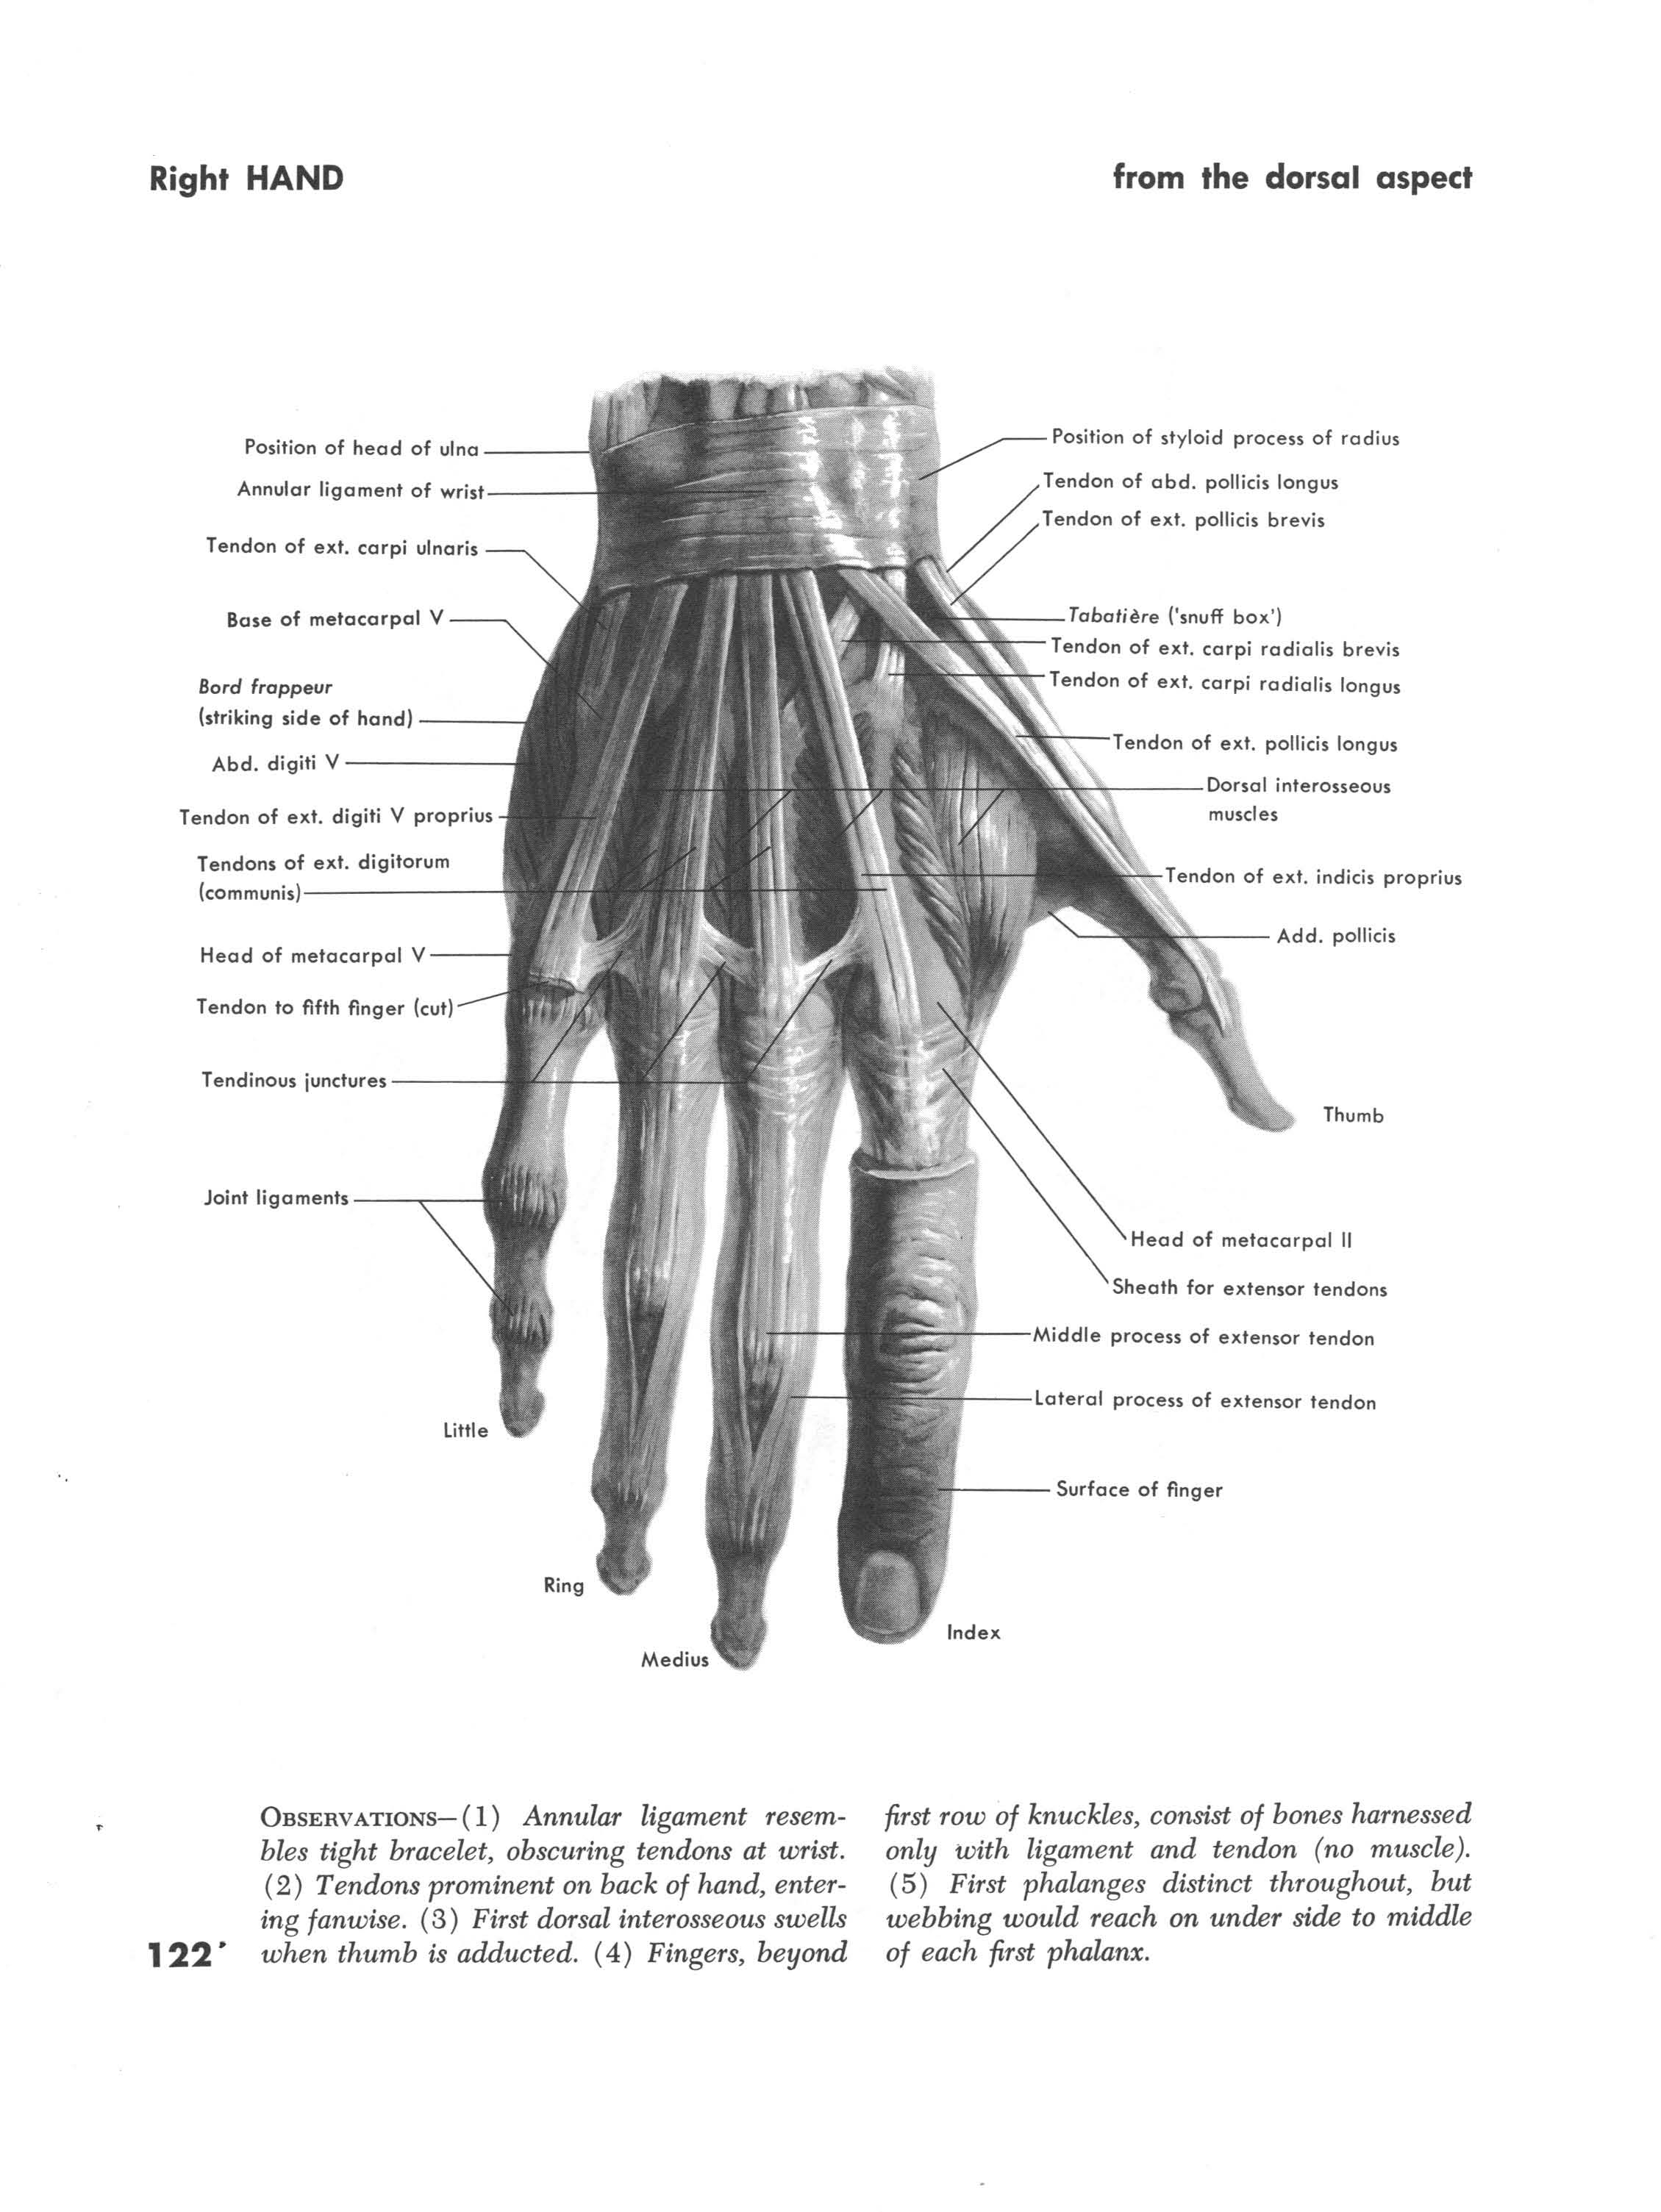 Muscles of the right hand